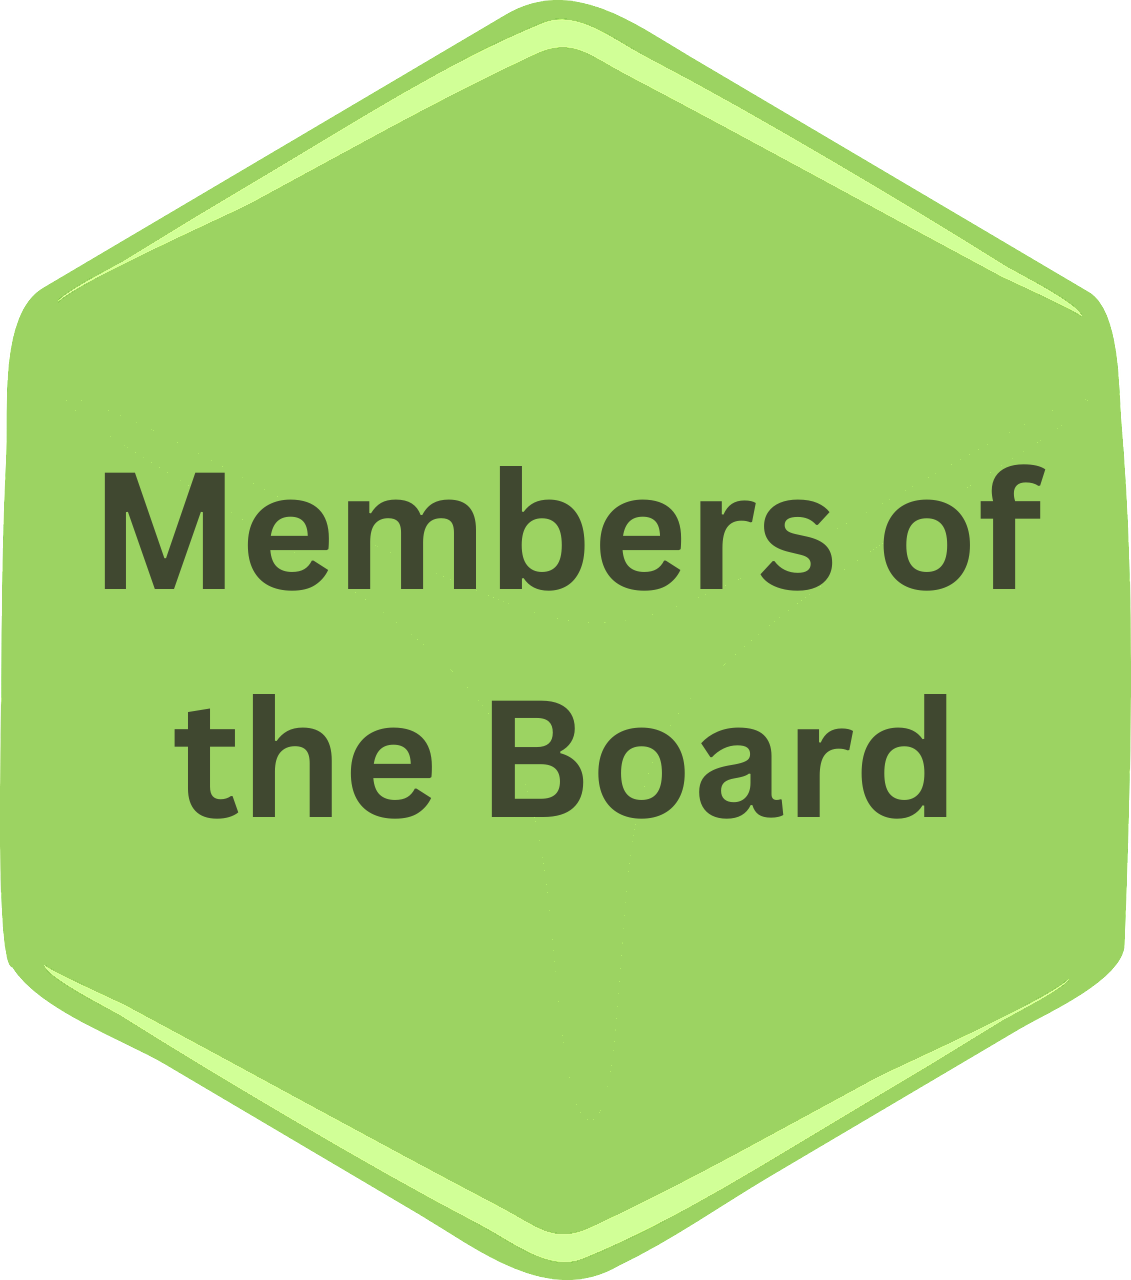 Members button to select member webpage